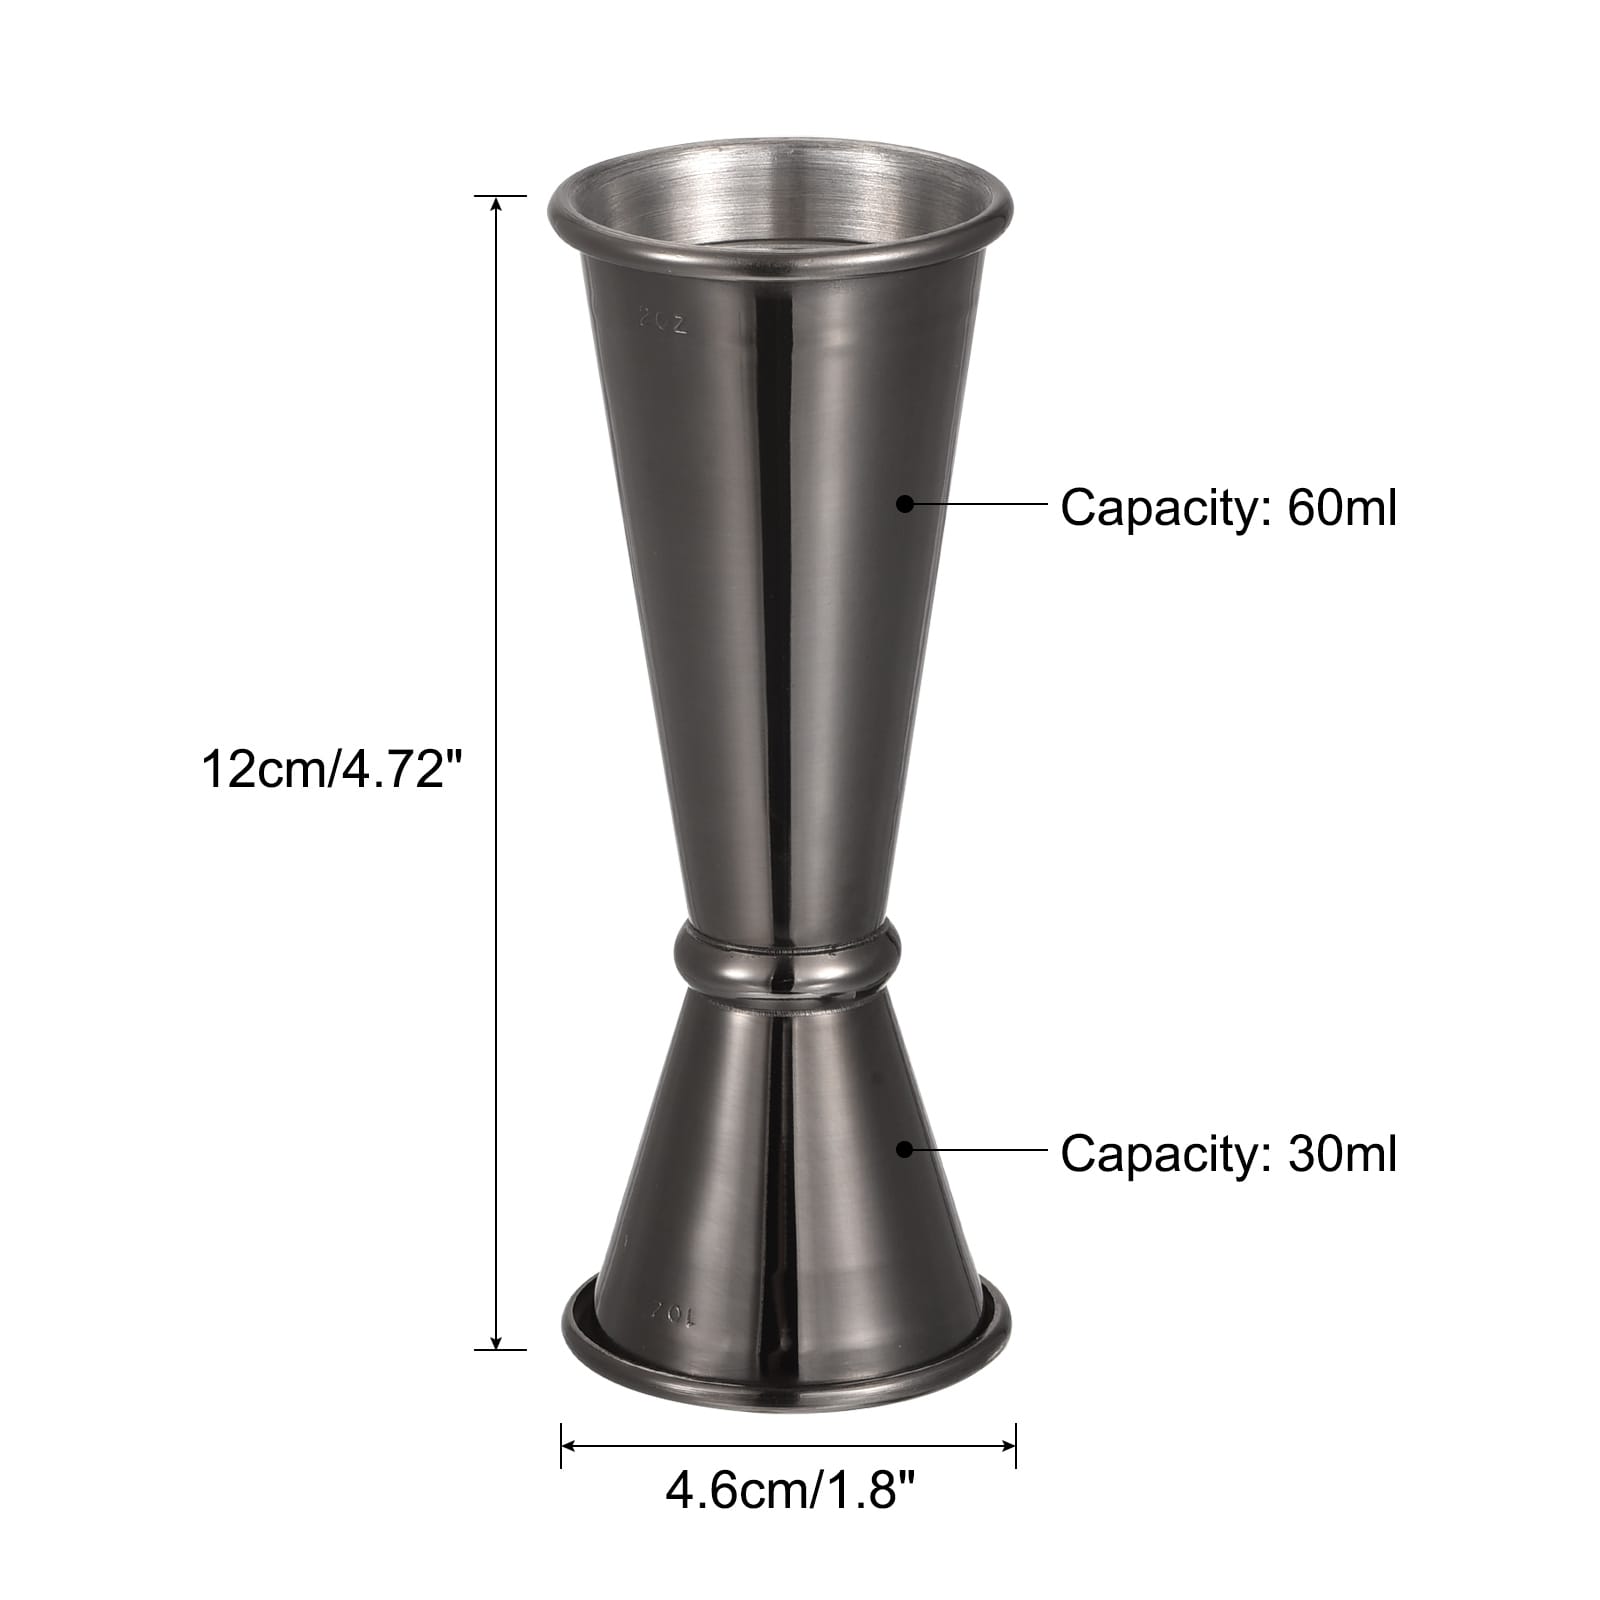 1oz/2oz Stainless Steel Cocktail Jigger Shot Glass Measuring Cup - 12cm x  4.6cm - Bed Bath & Beyond - 36805523